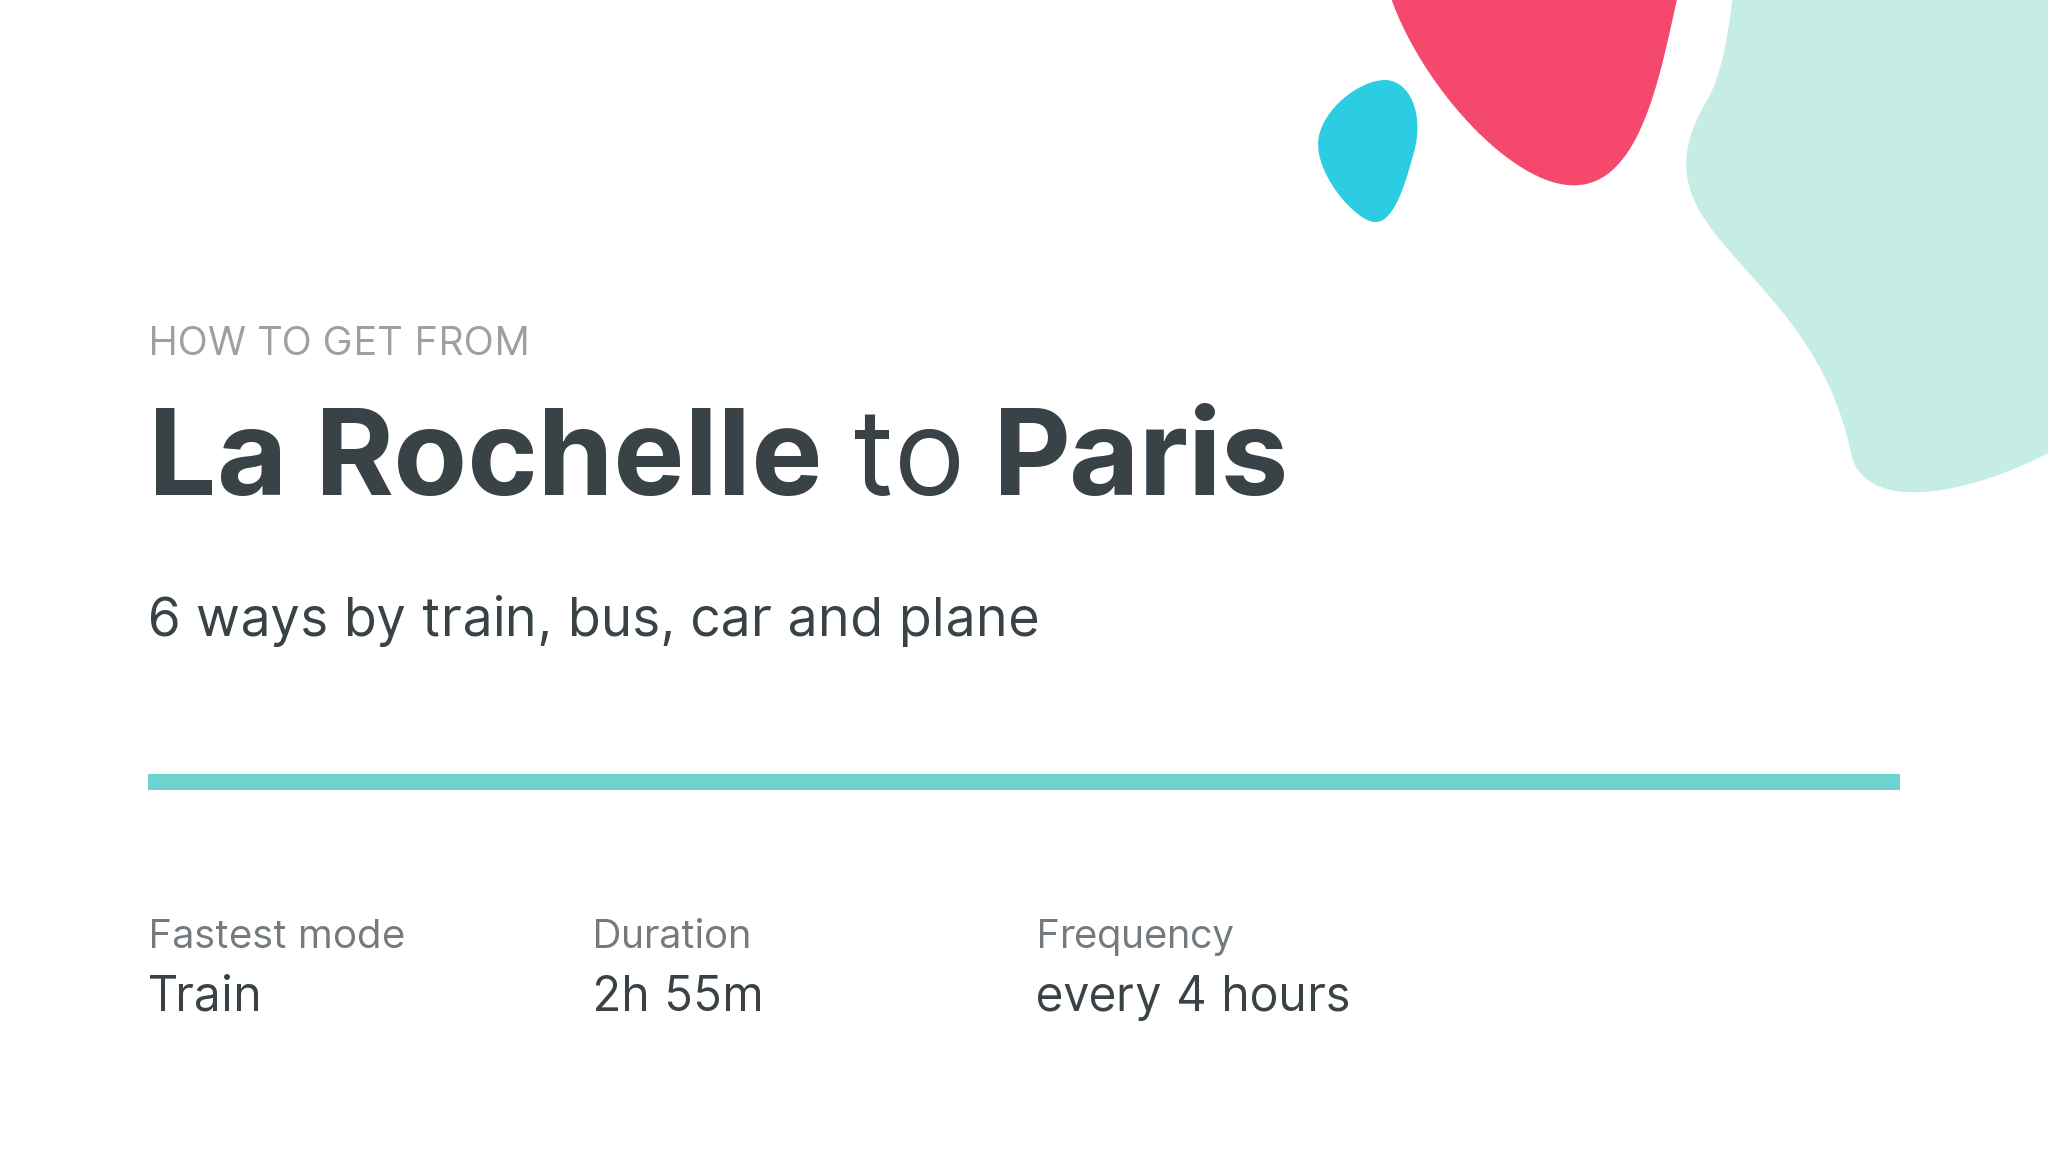 How do I get from La Rochelle to Paris